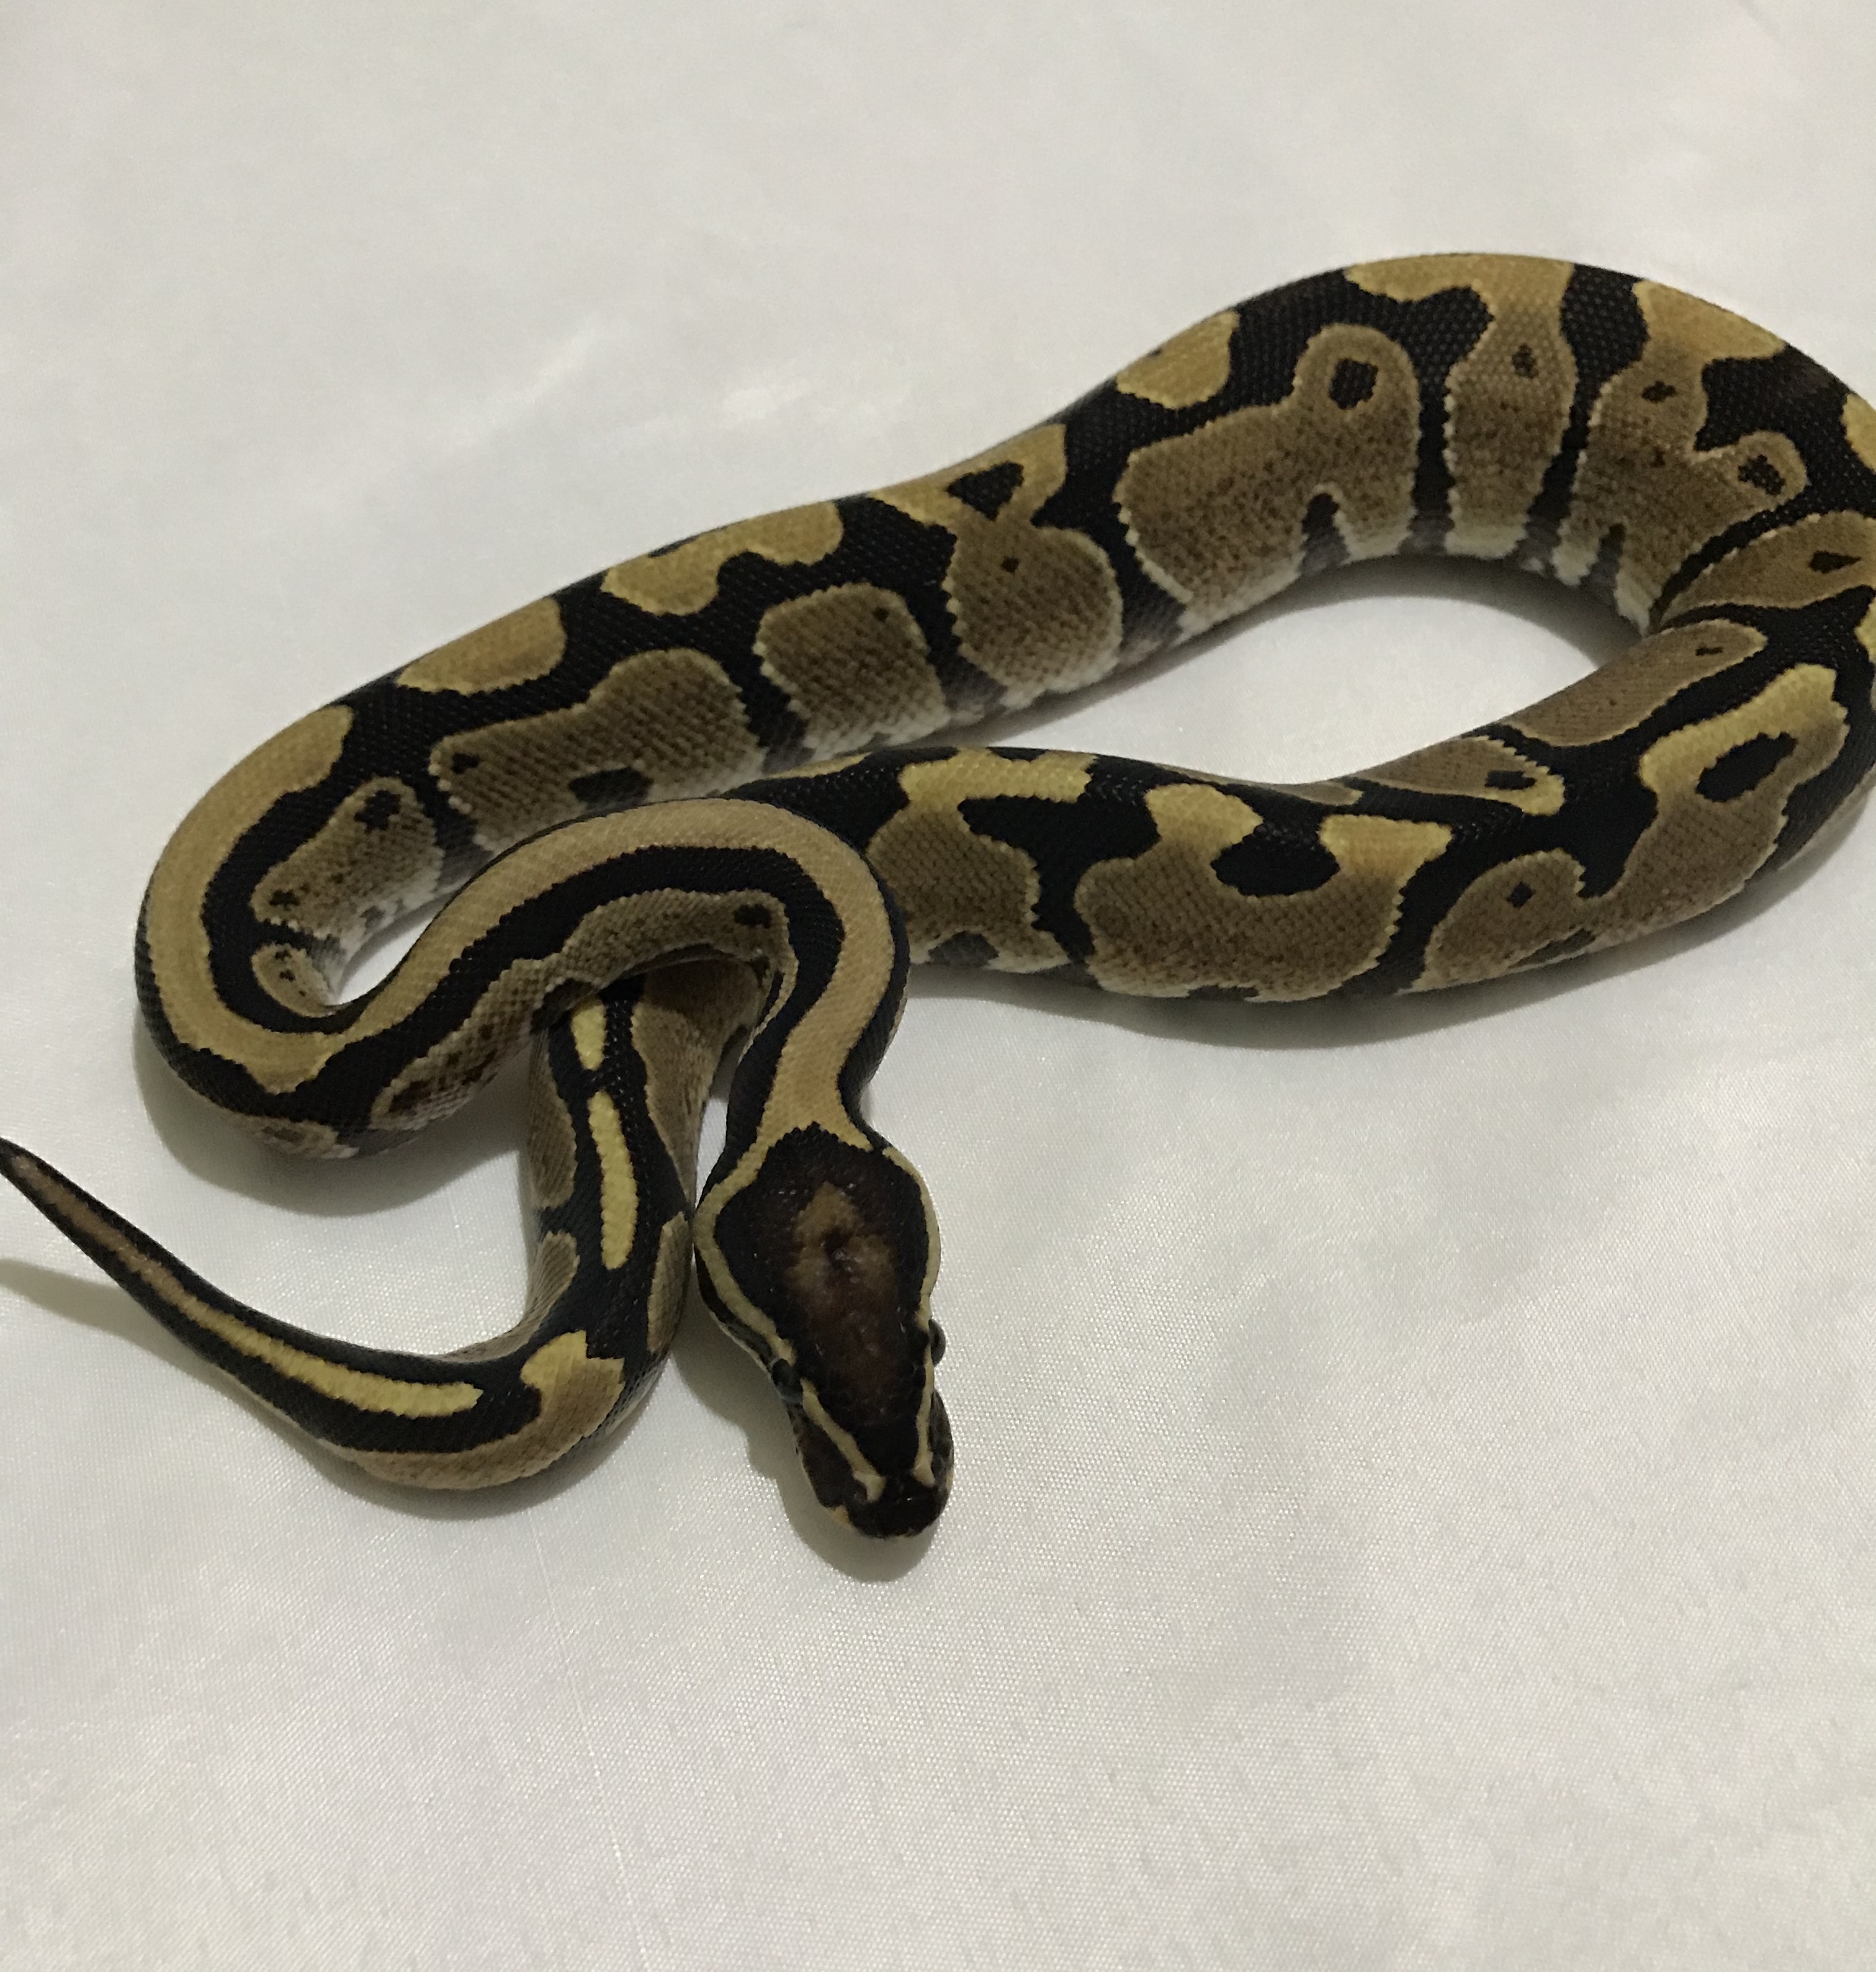 Sulfur Ball Python by From The Darkside